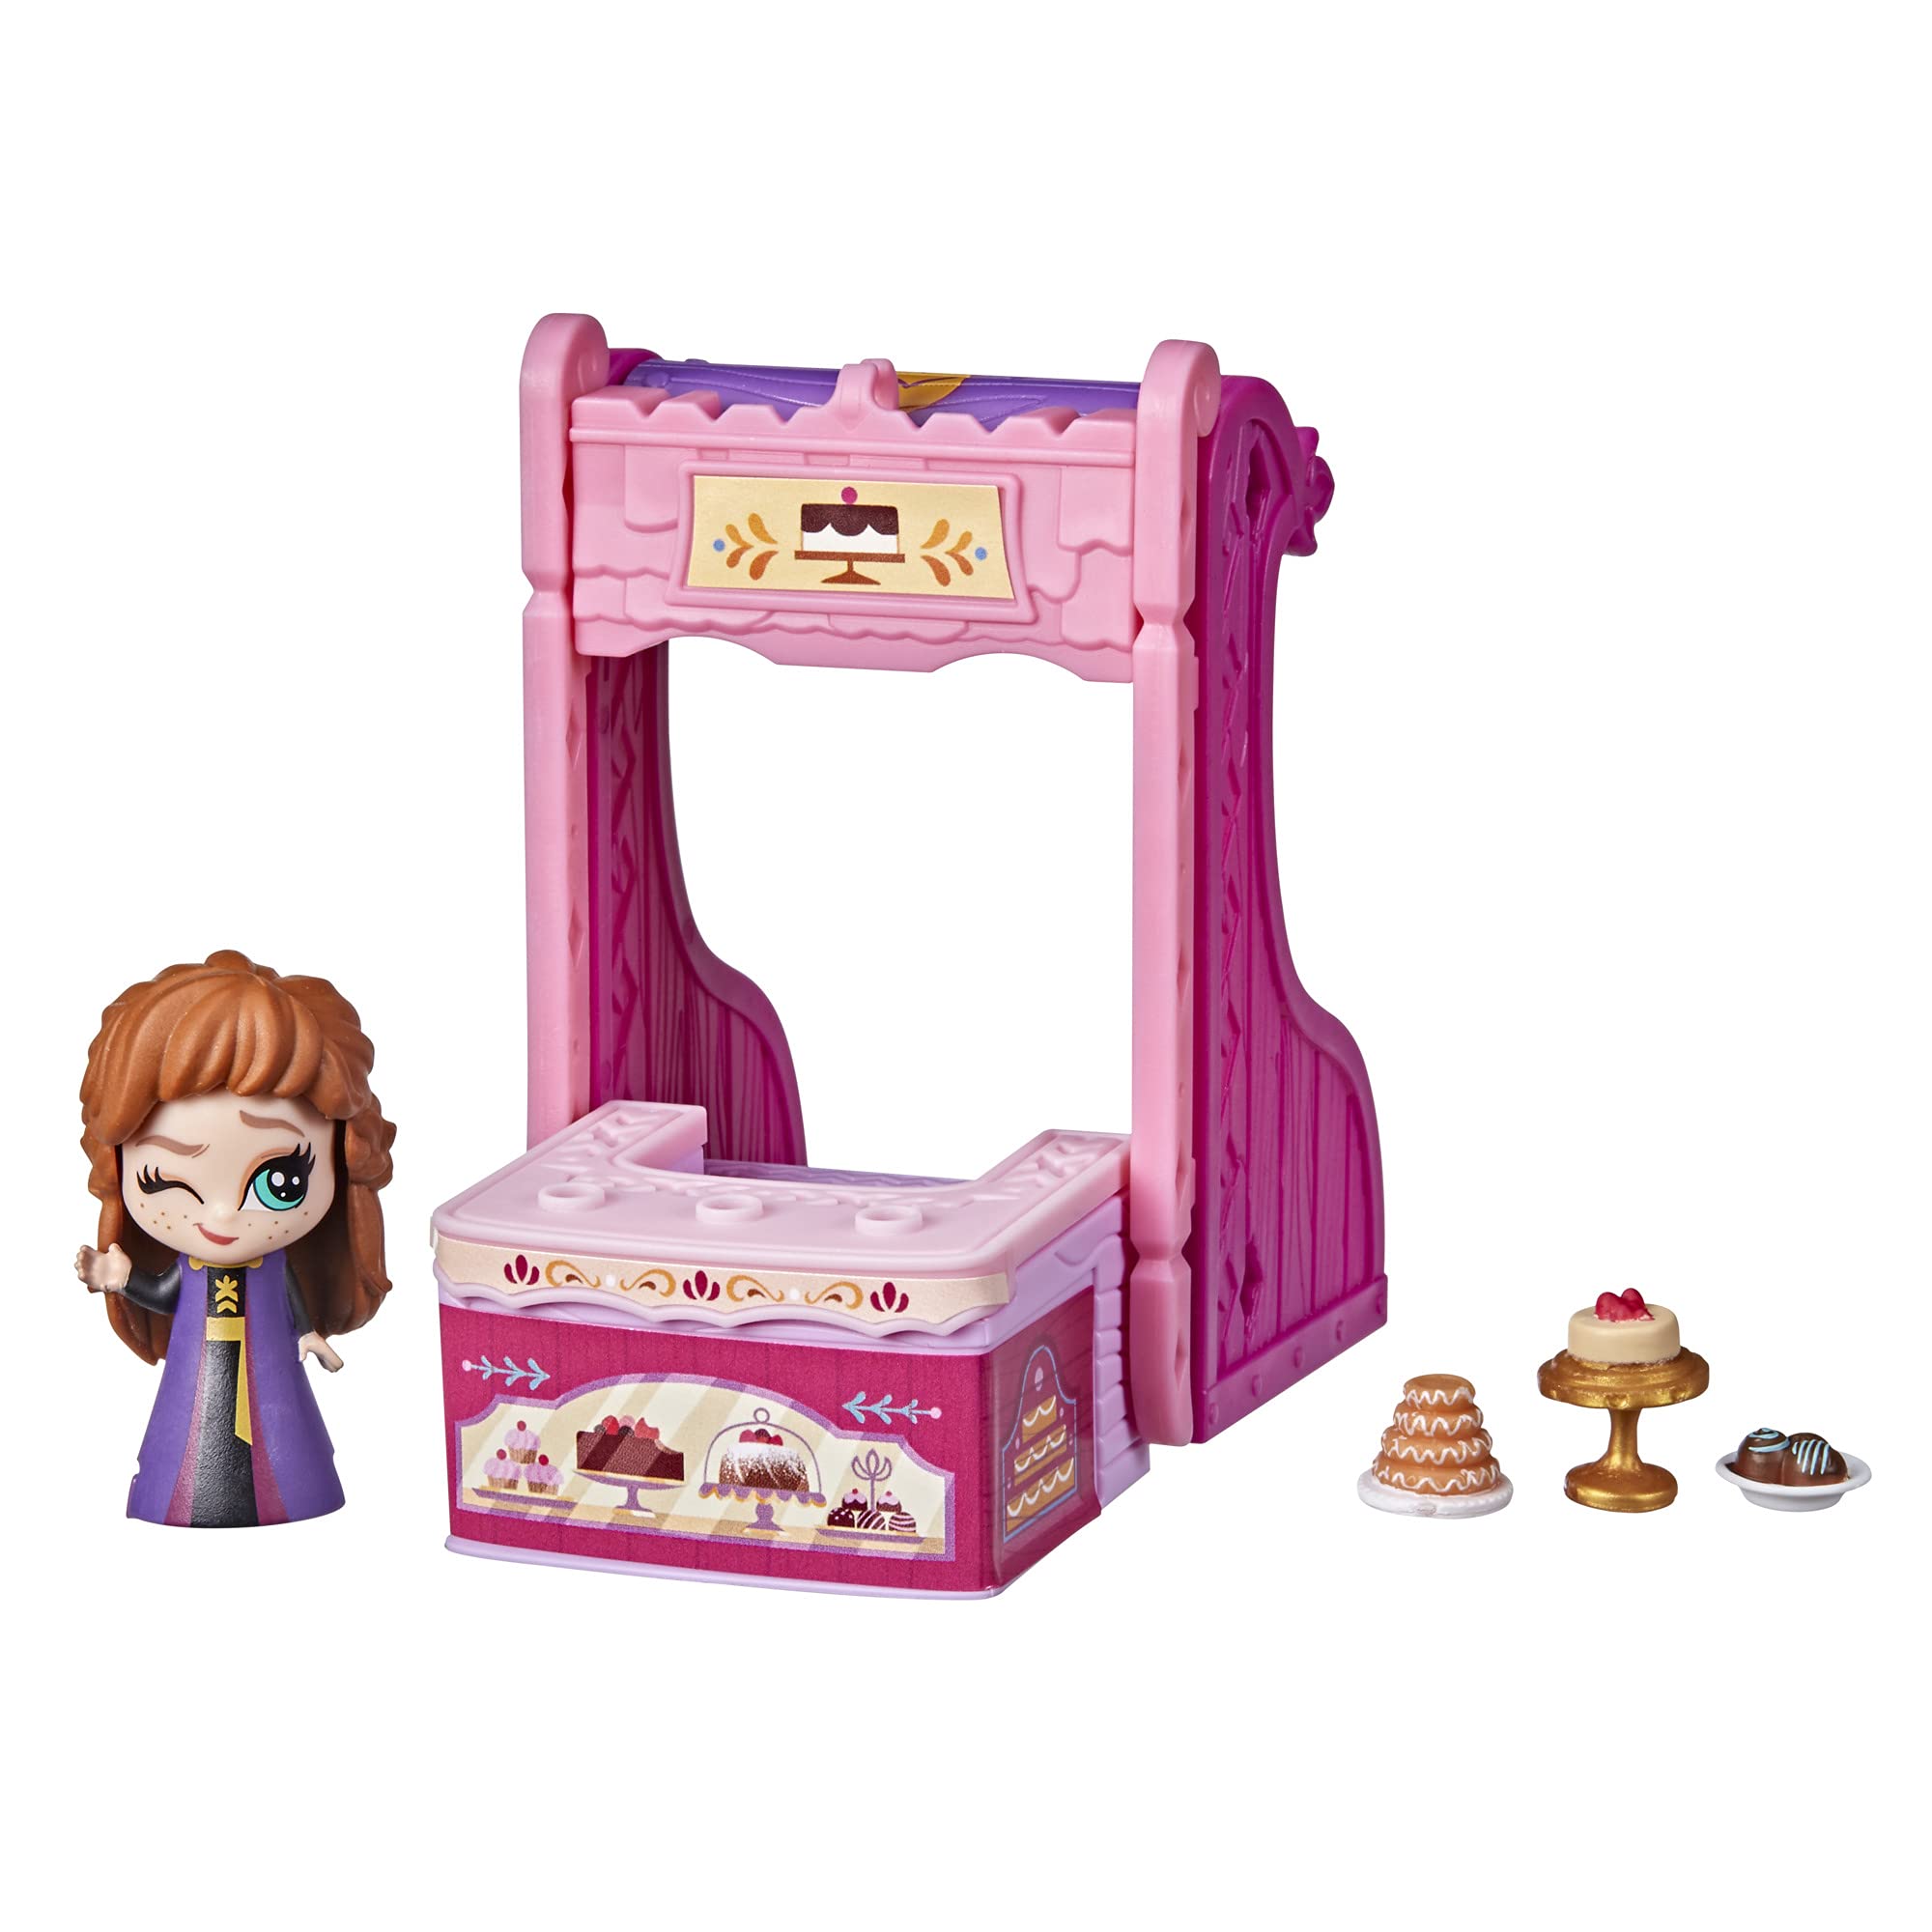 Disney Frozen 2 Twirlabouts Series 1 Anna Sled To Shop Playset, Includes Anna Doll And Accessories, Toy For Kids 3 And Up